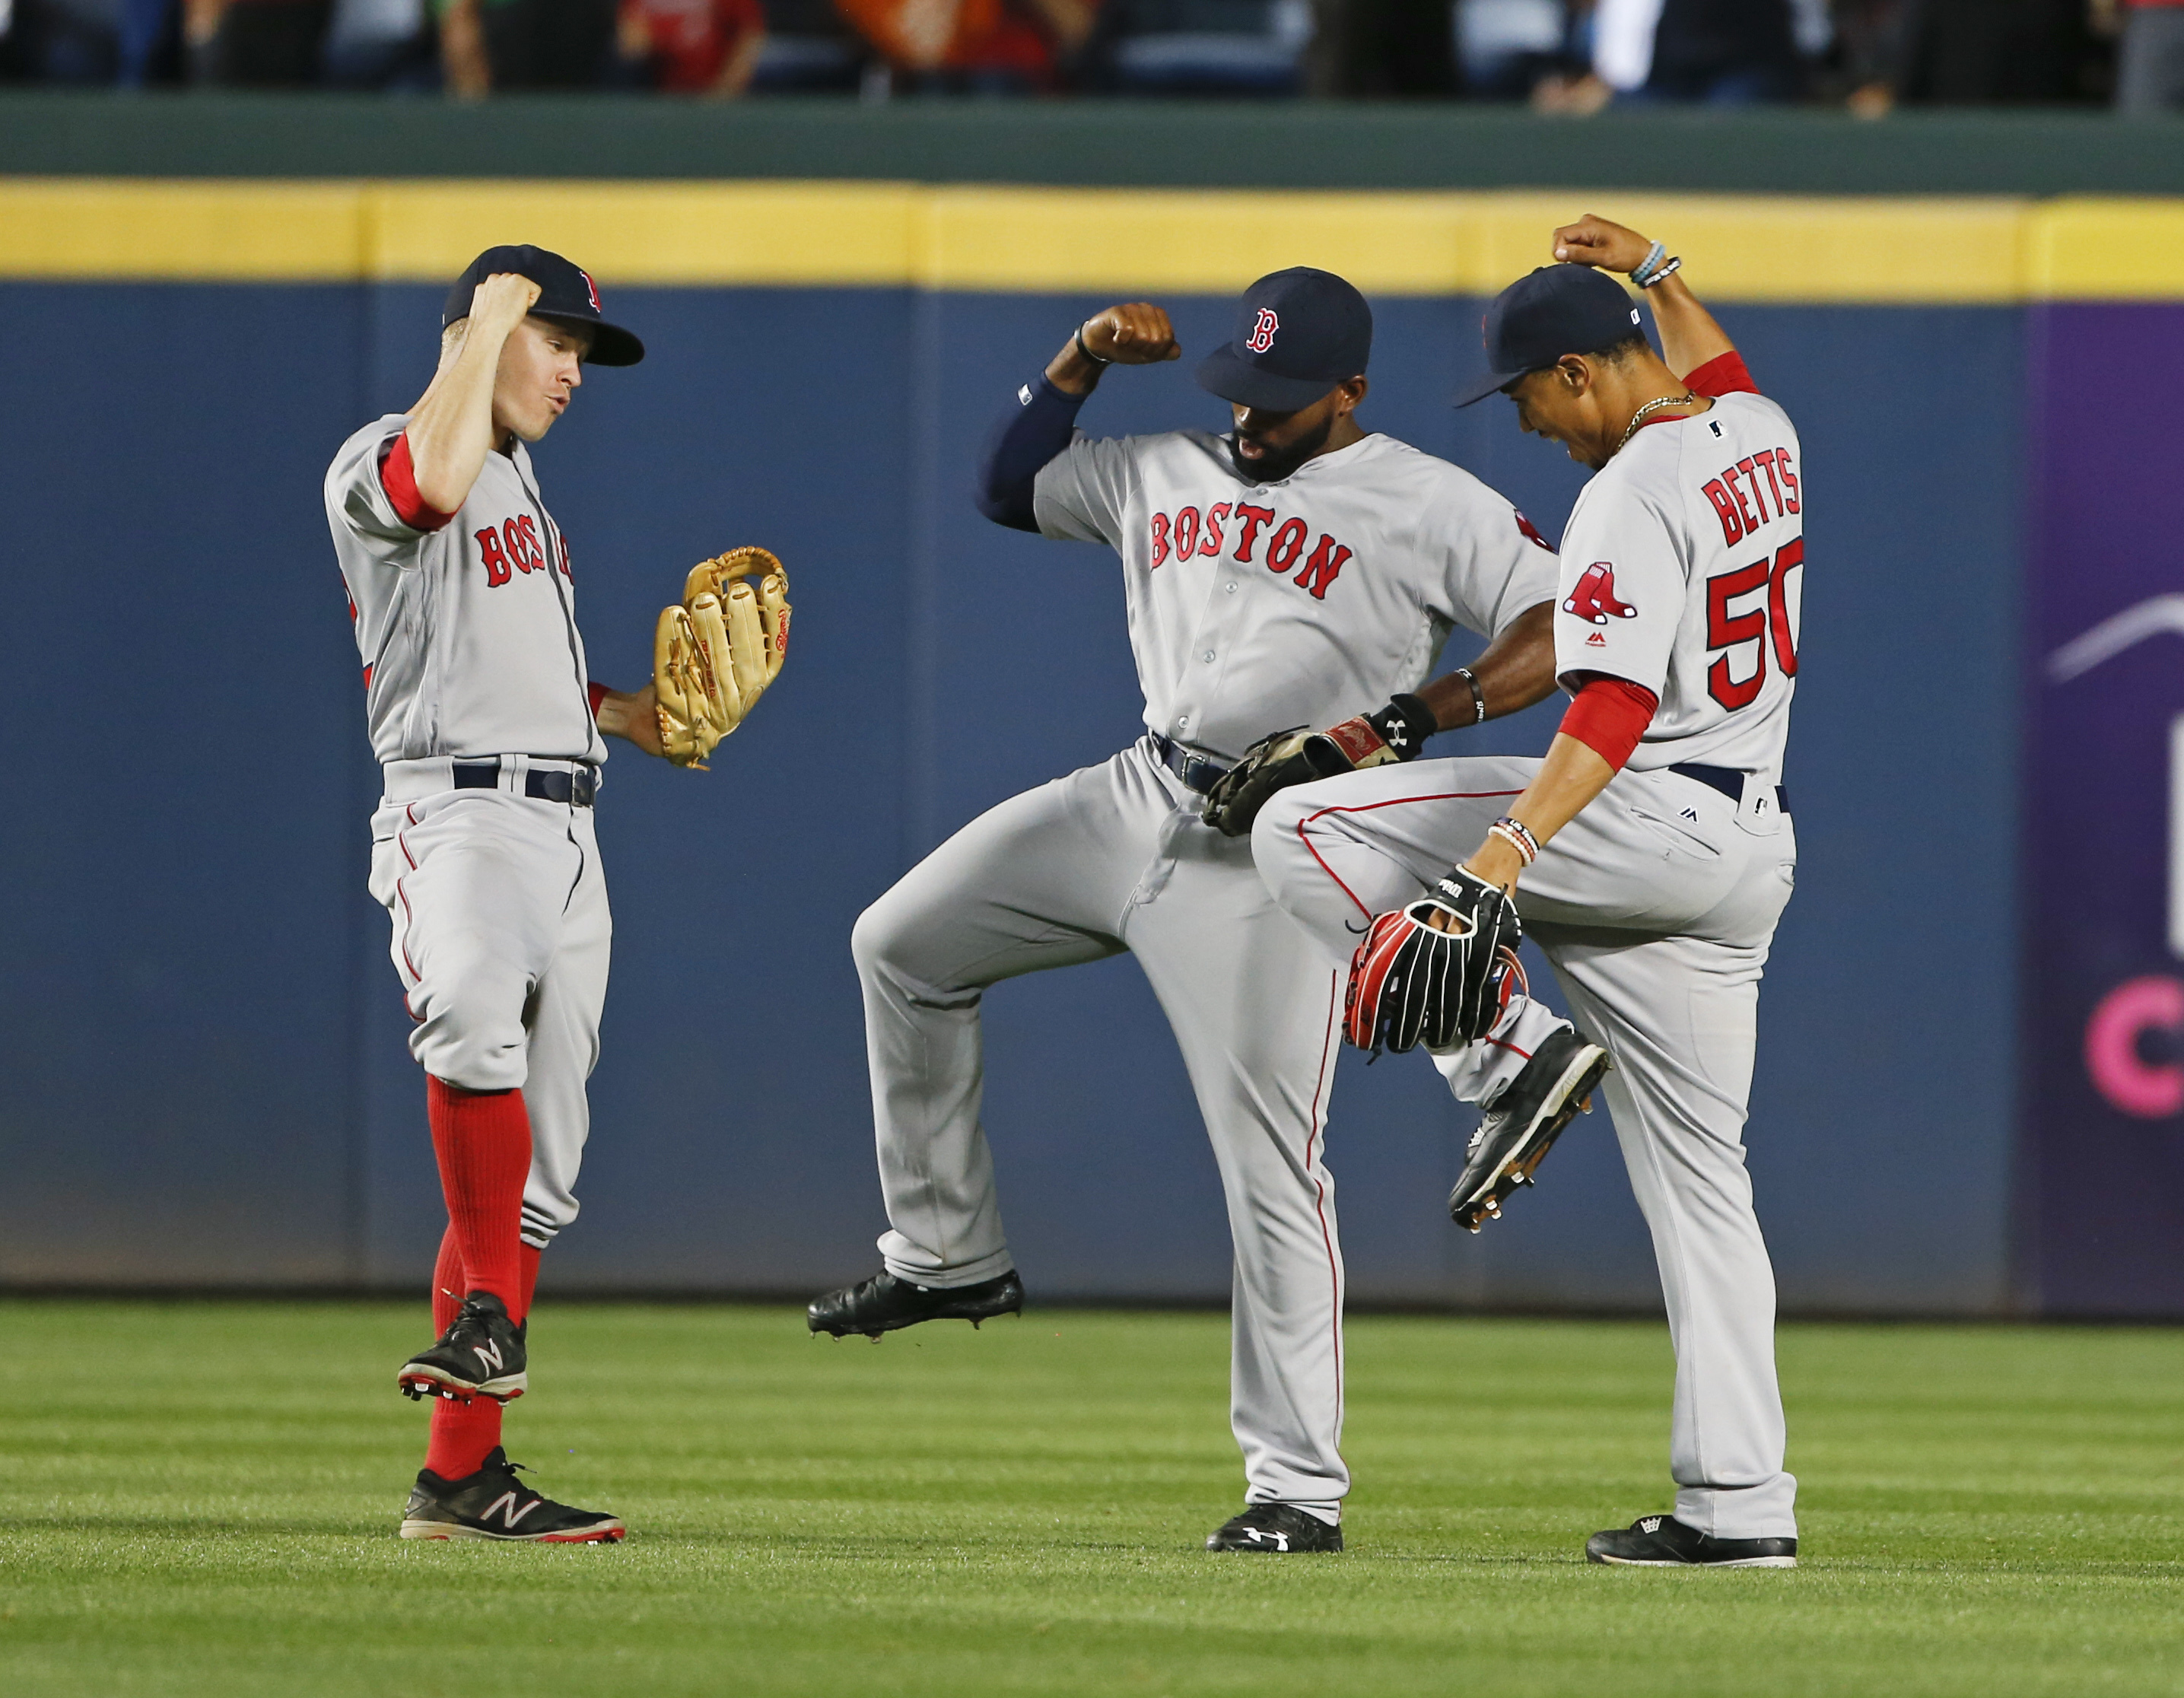 Brock Holt didn't see stop sign from Boston Red Sox third base